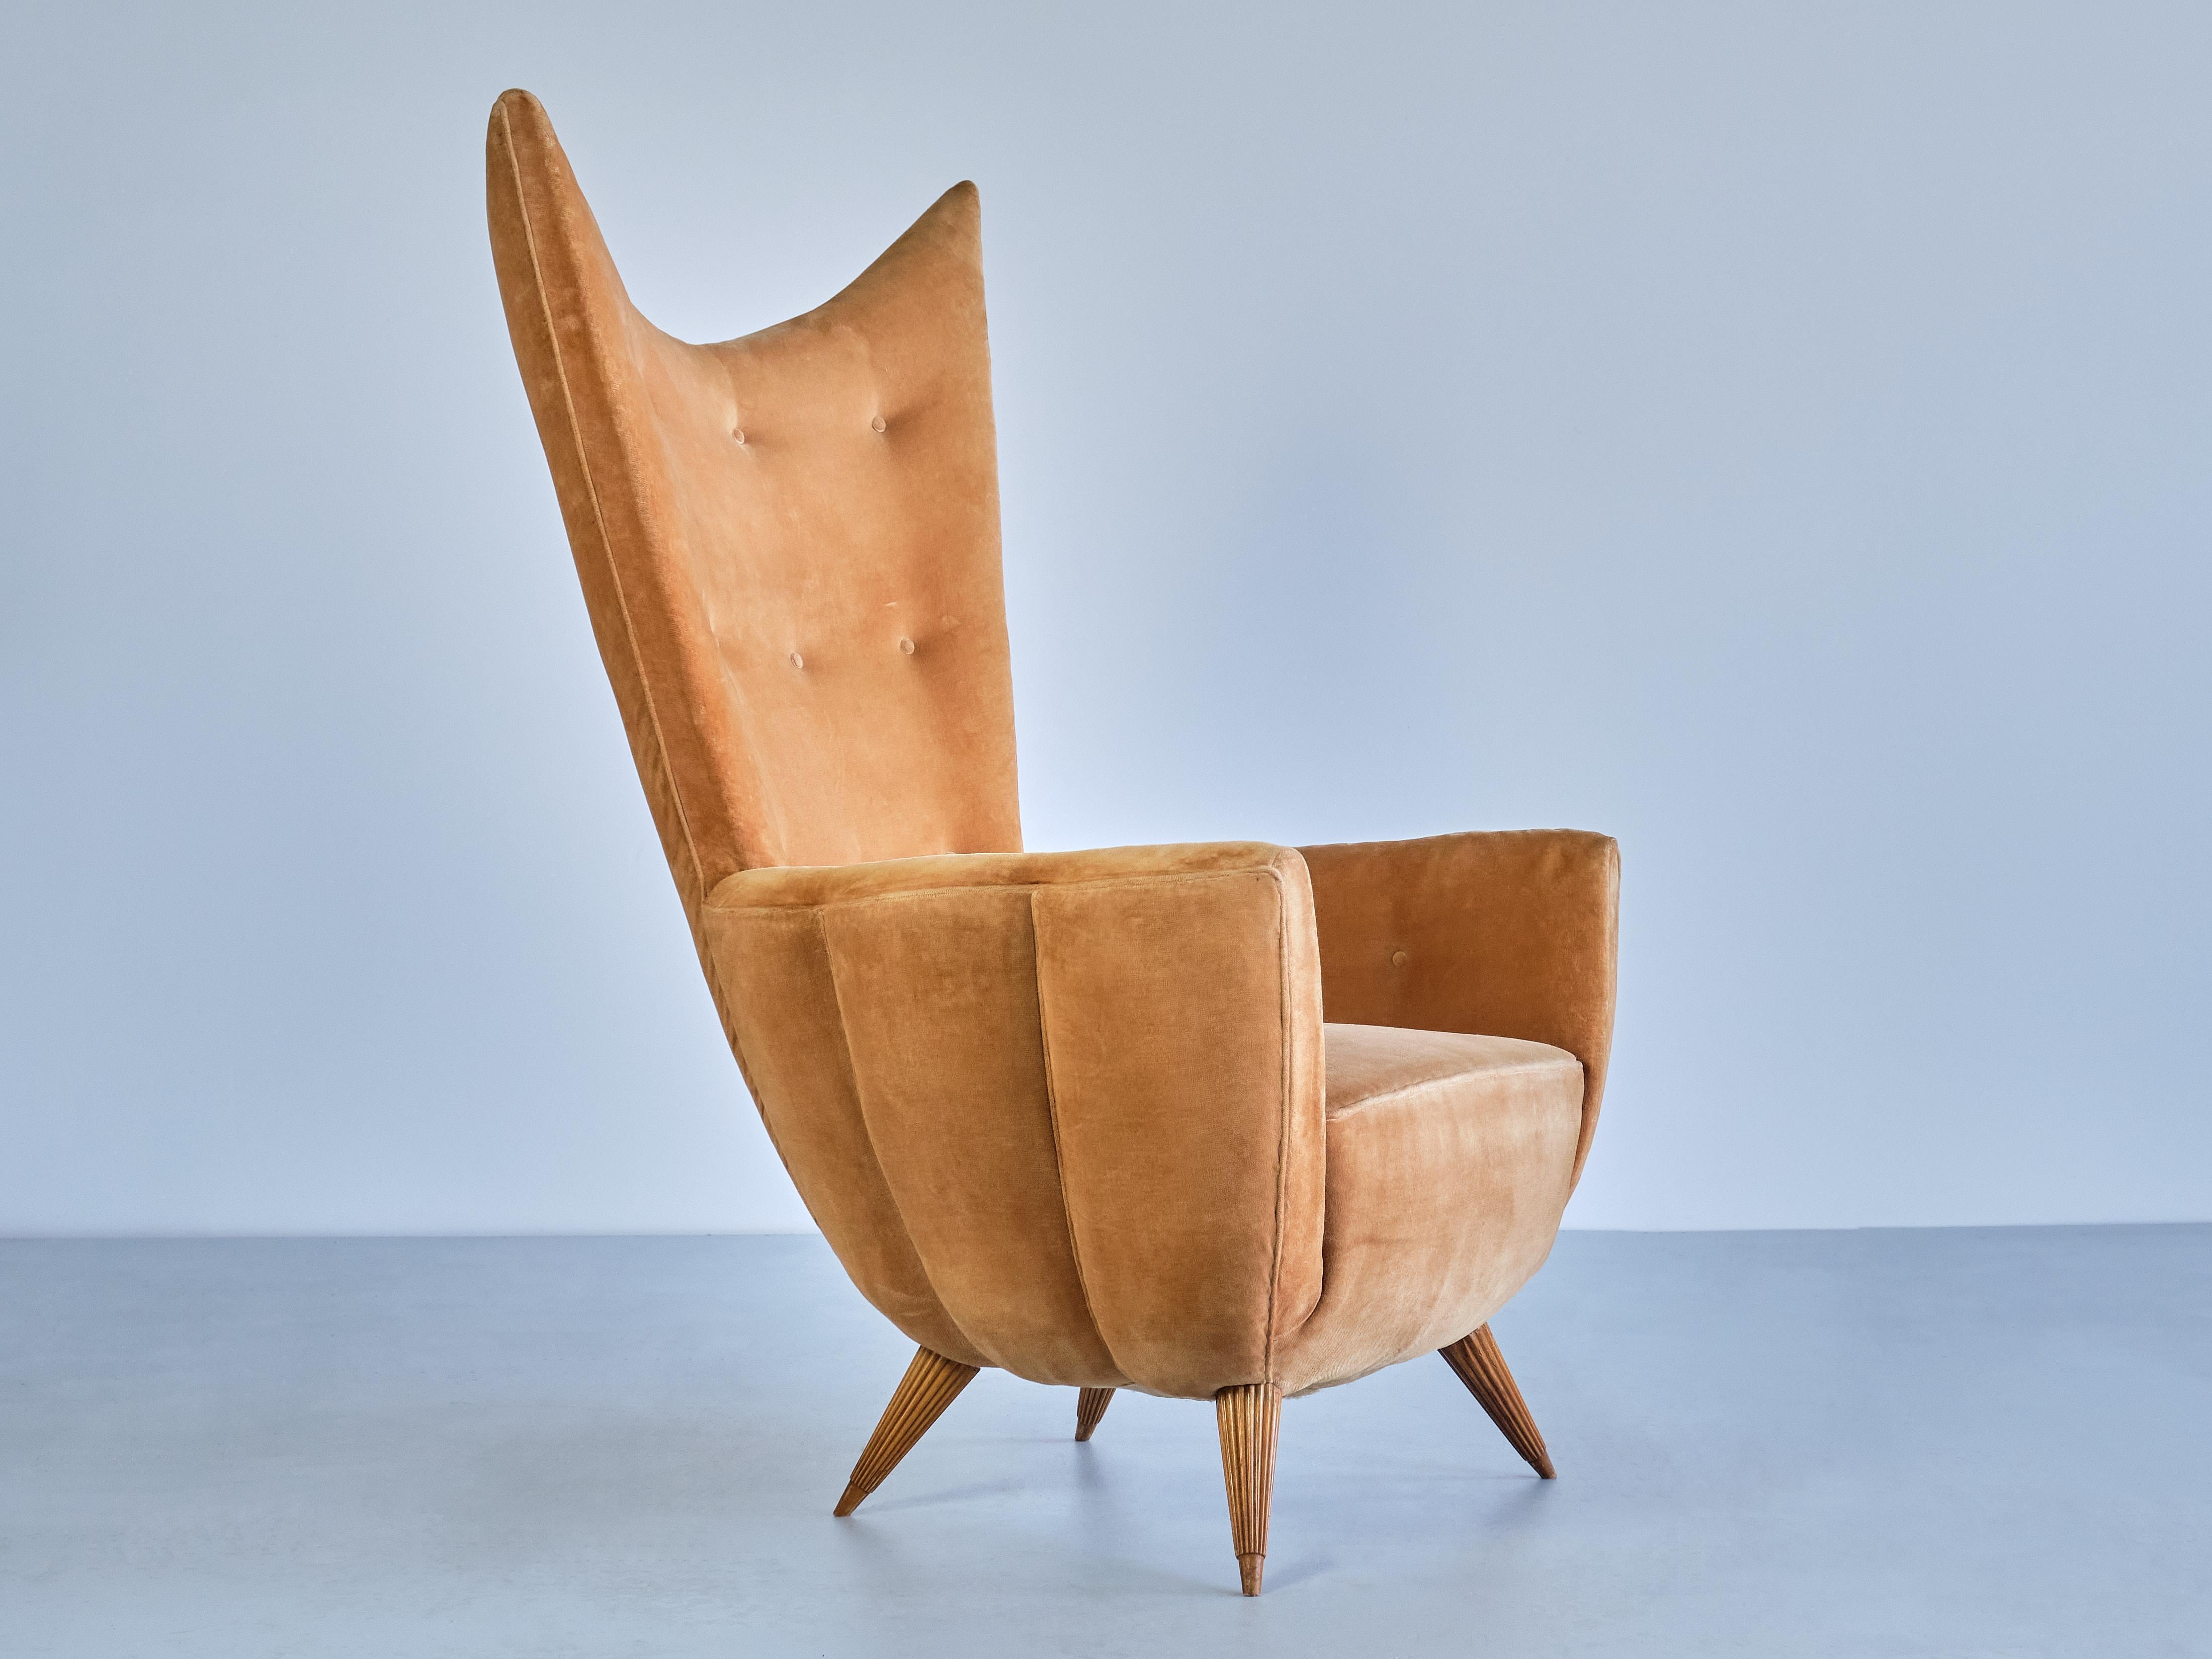 Exceptional Guglielmo Ulrich Armchair in Velvet and Fluted Walnut, Italy, 1940s For Sale 5